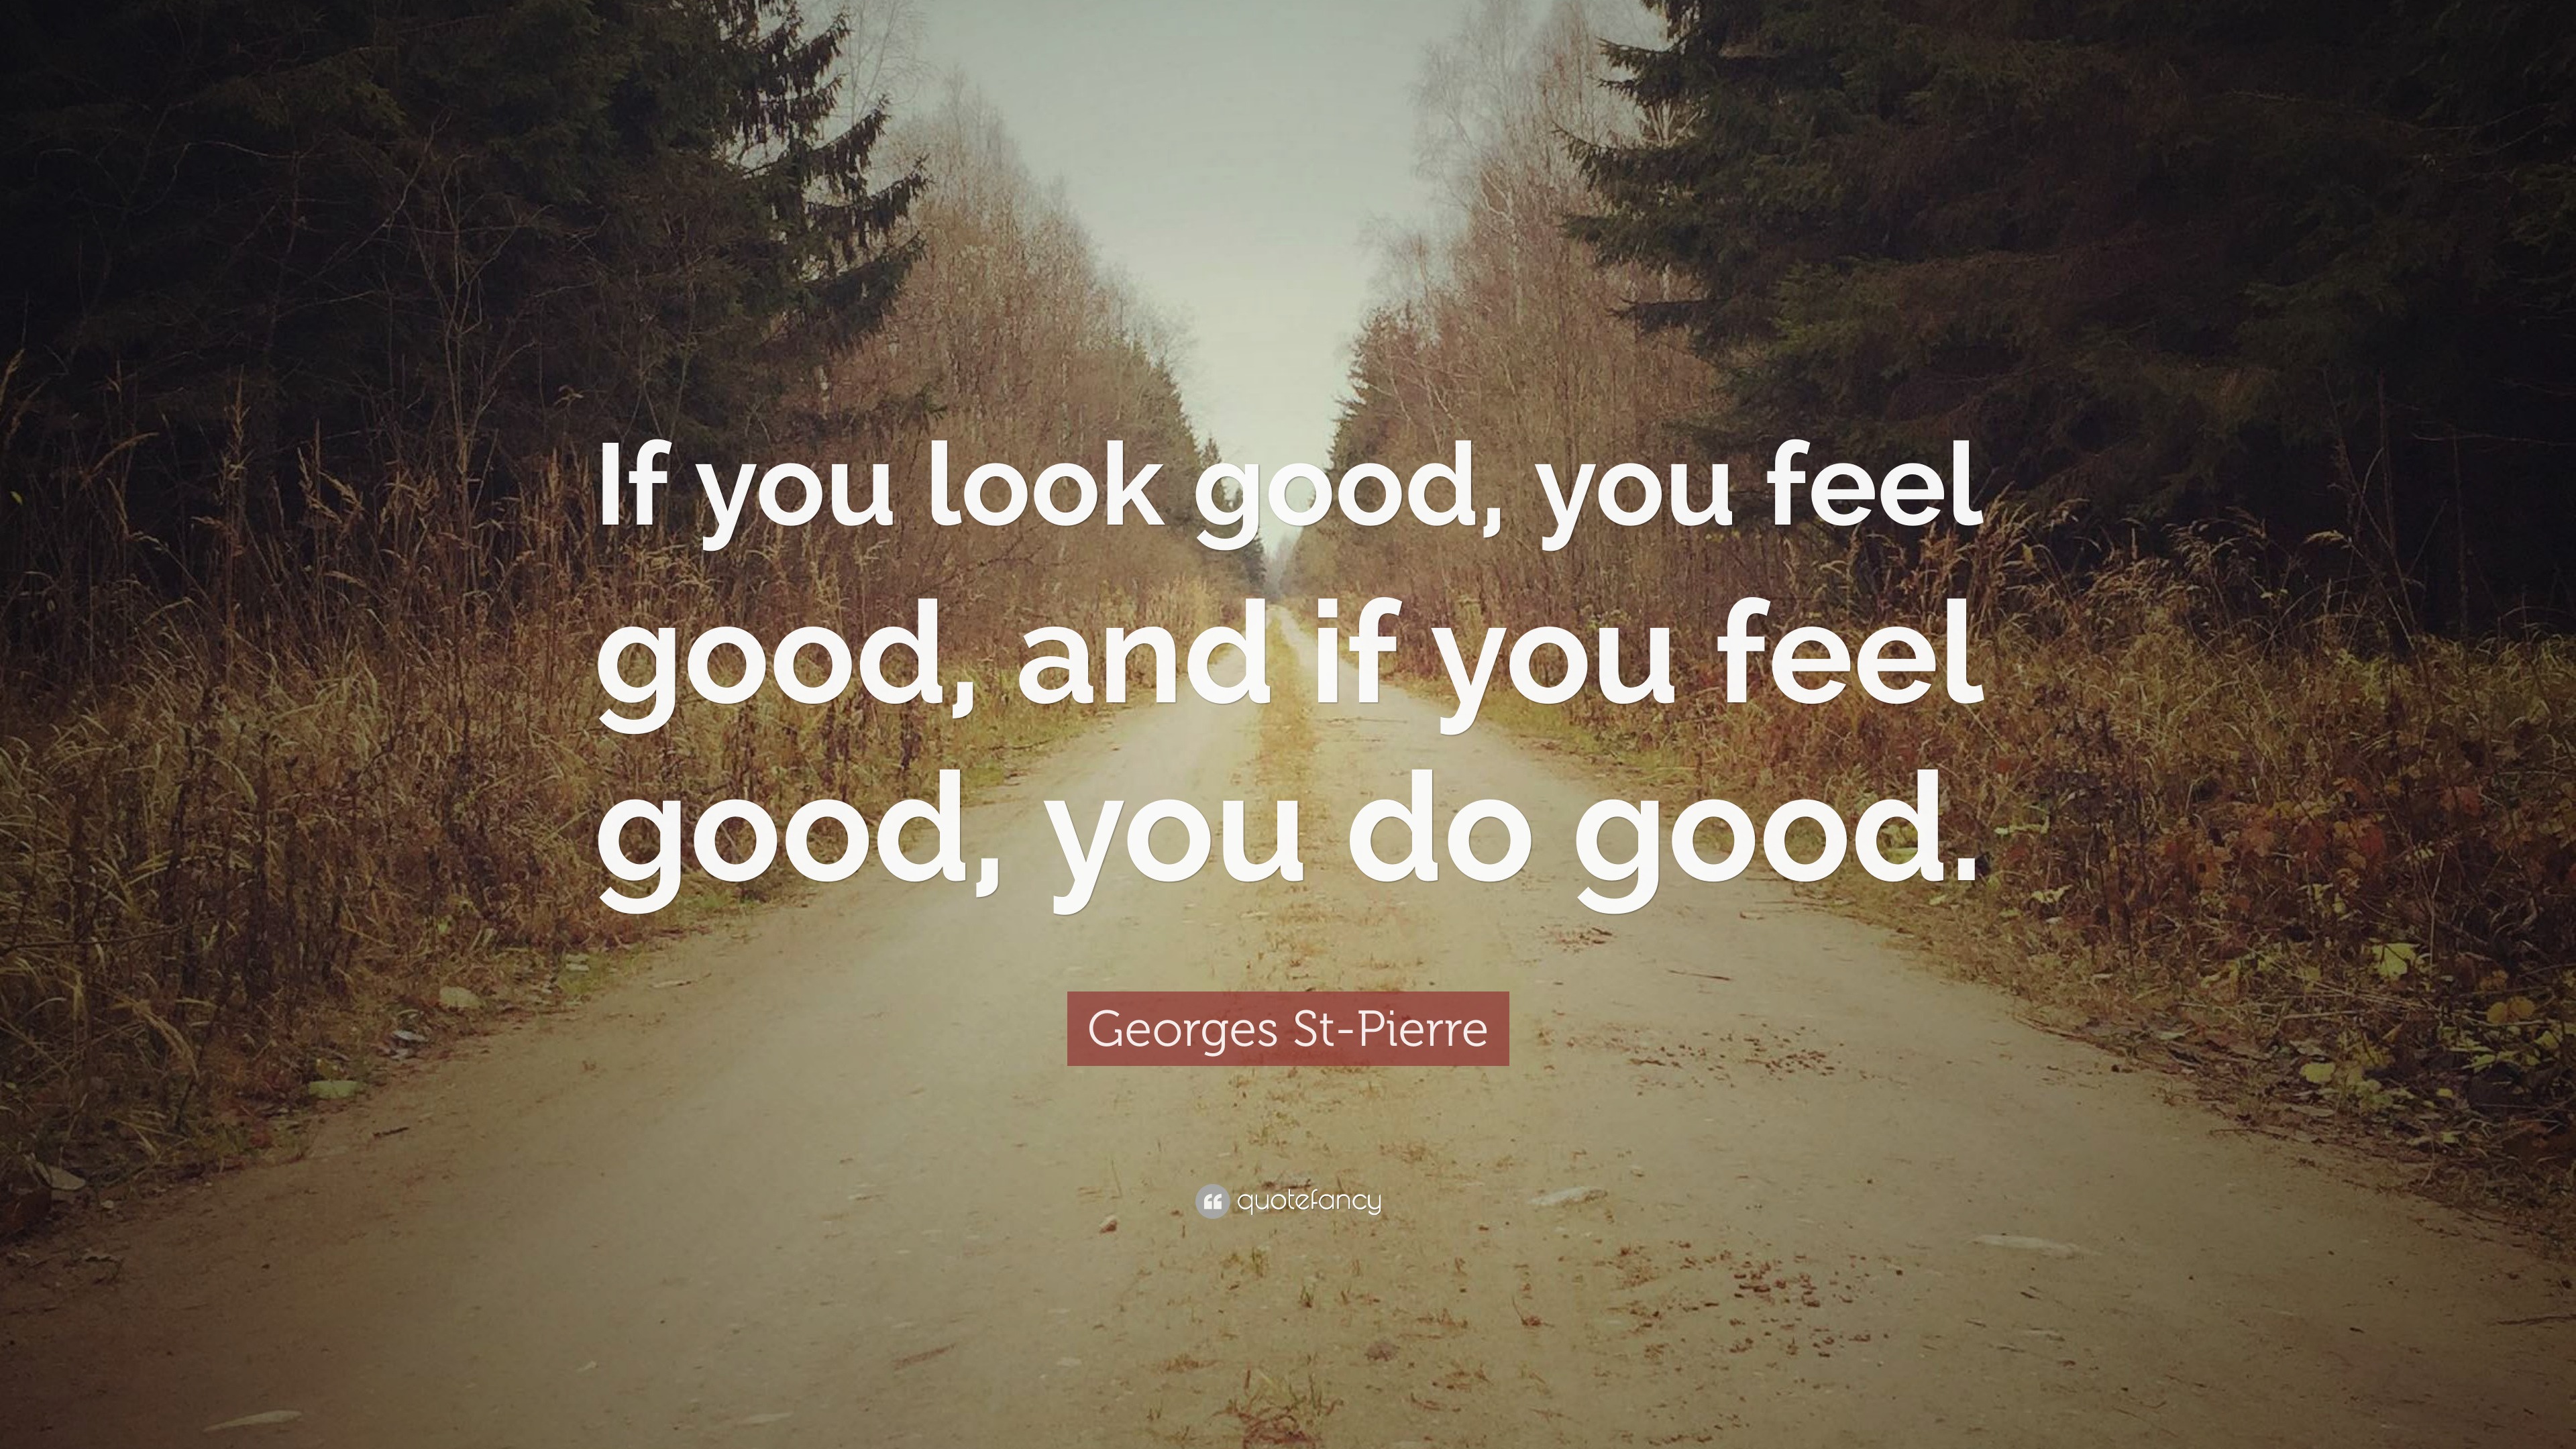 Georges St-Pierre Quote: “If you look good, you feel good, and if you feel  good